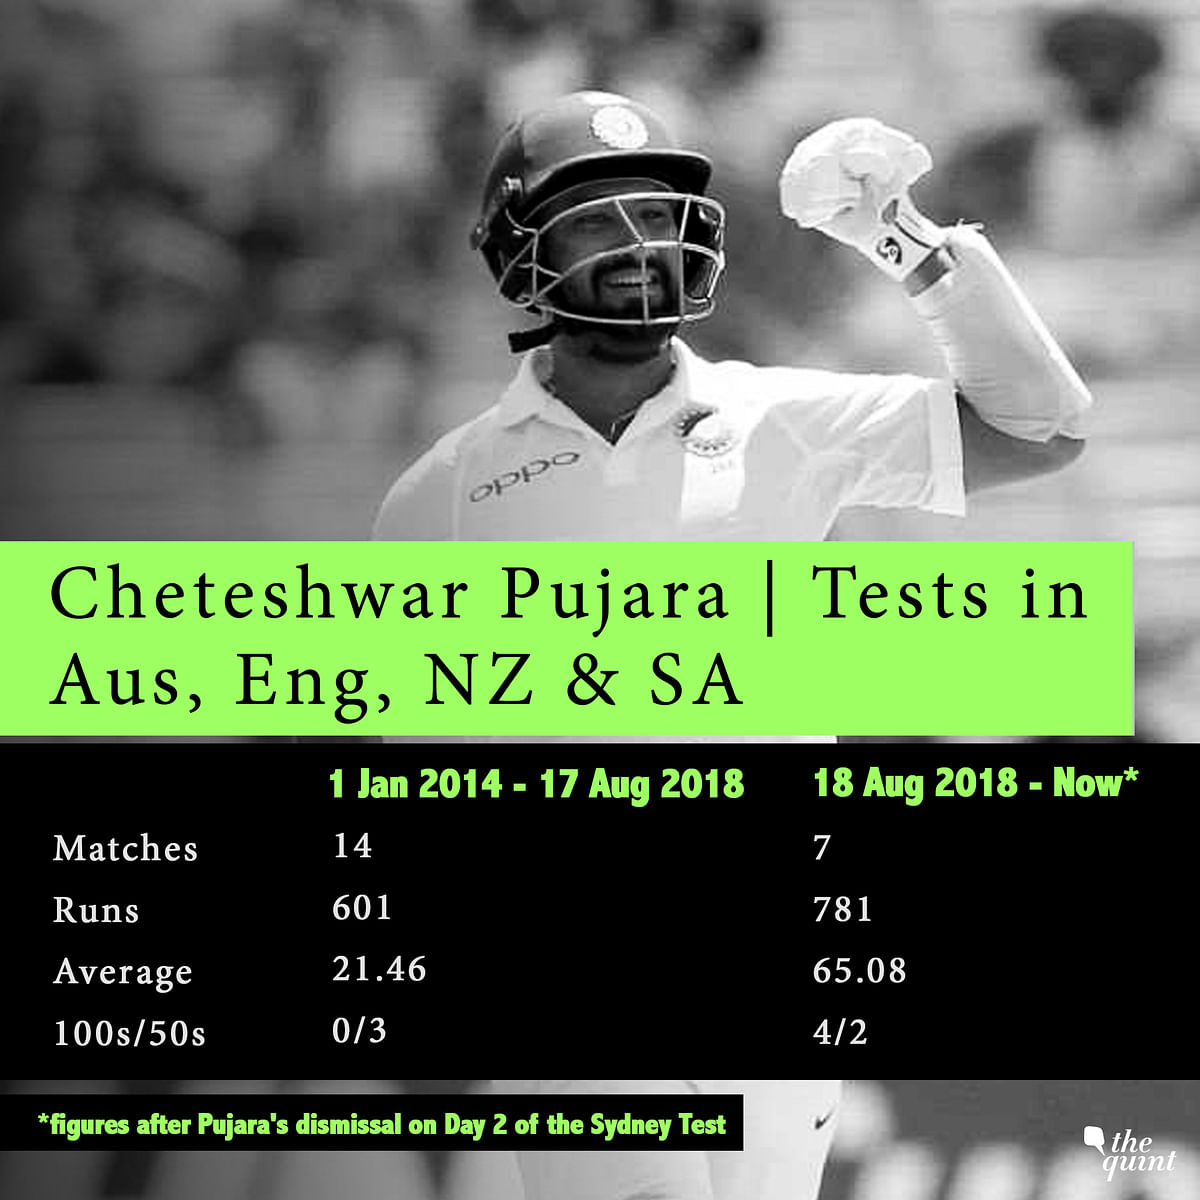 Dropped at Sydney four years ago, Pujara has made himself ‘undroppable’ through a golden summer Down Under.